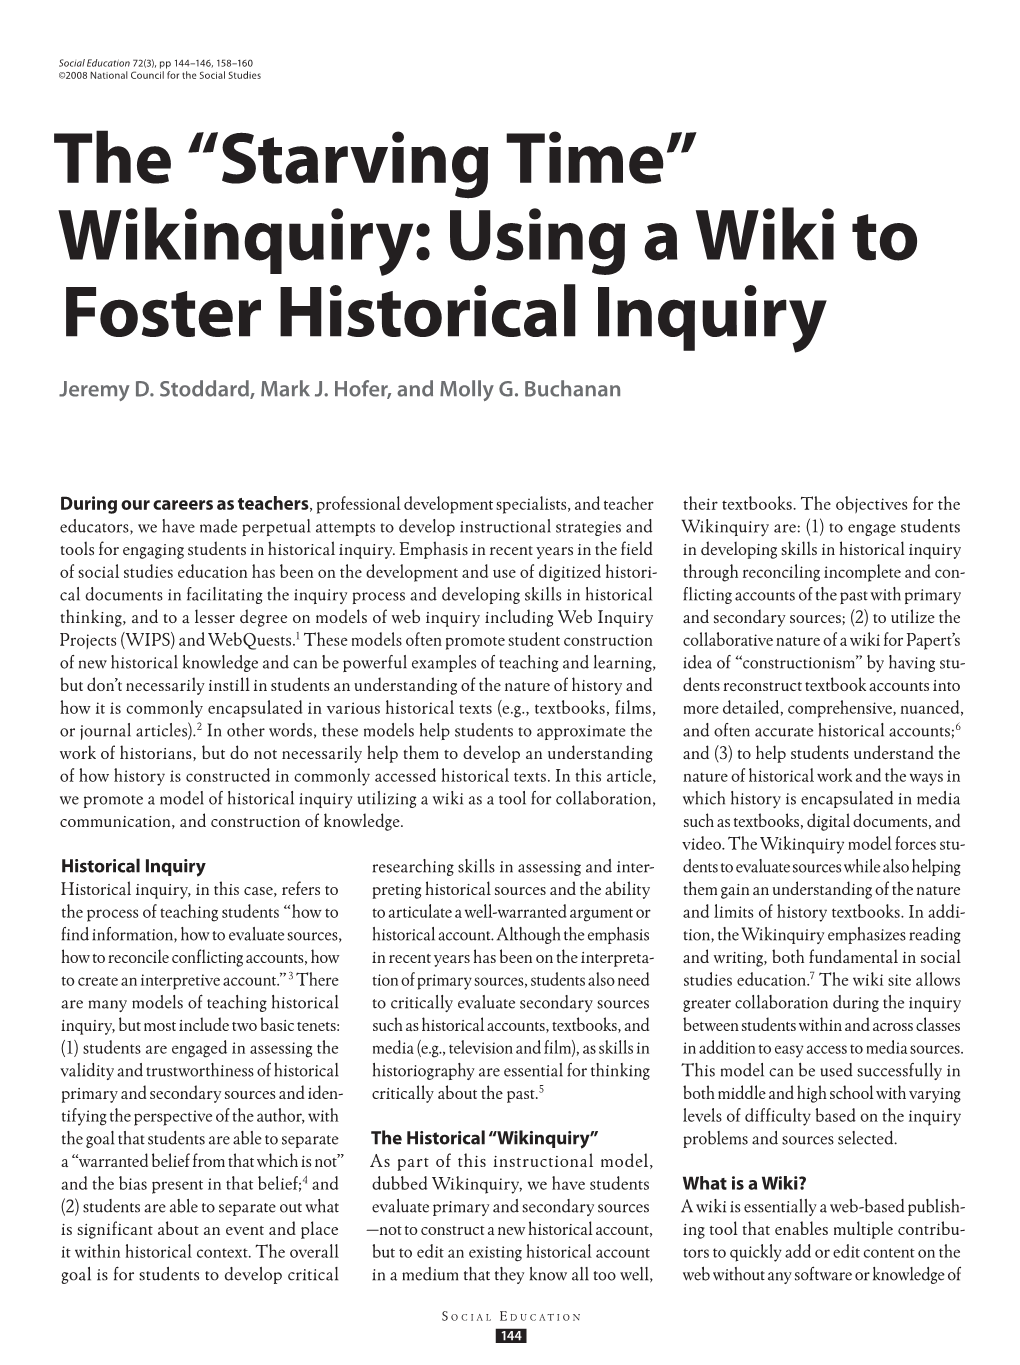 The “Starving Time” Wikinquiry: Using a Wiki to Foster Historical Inquiry